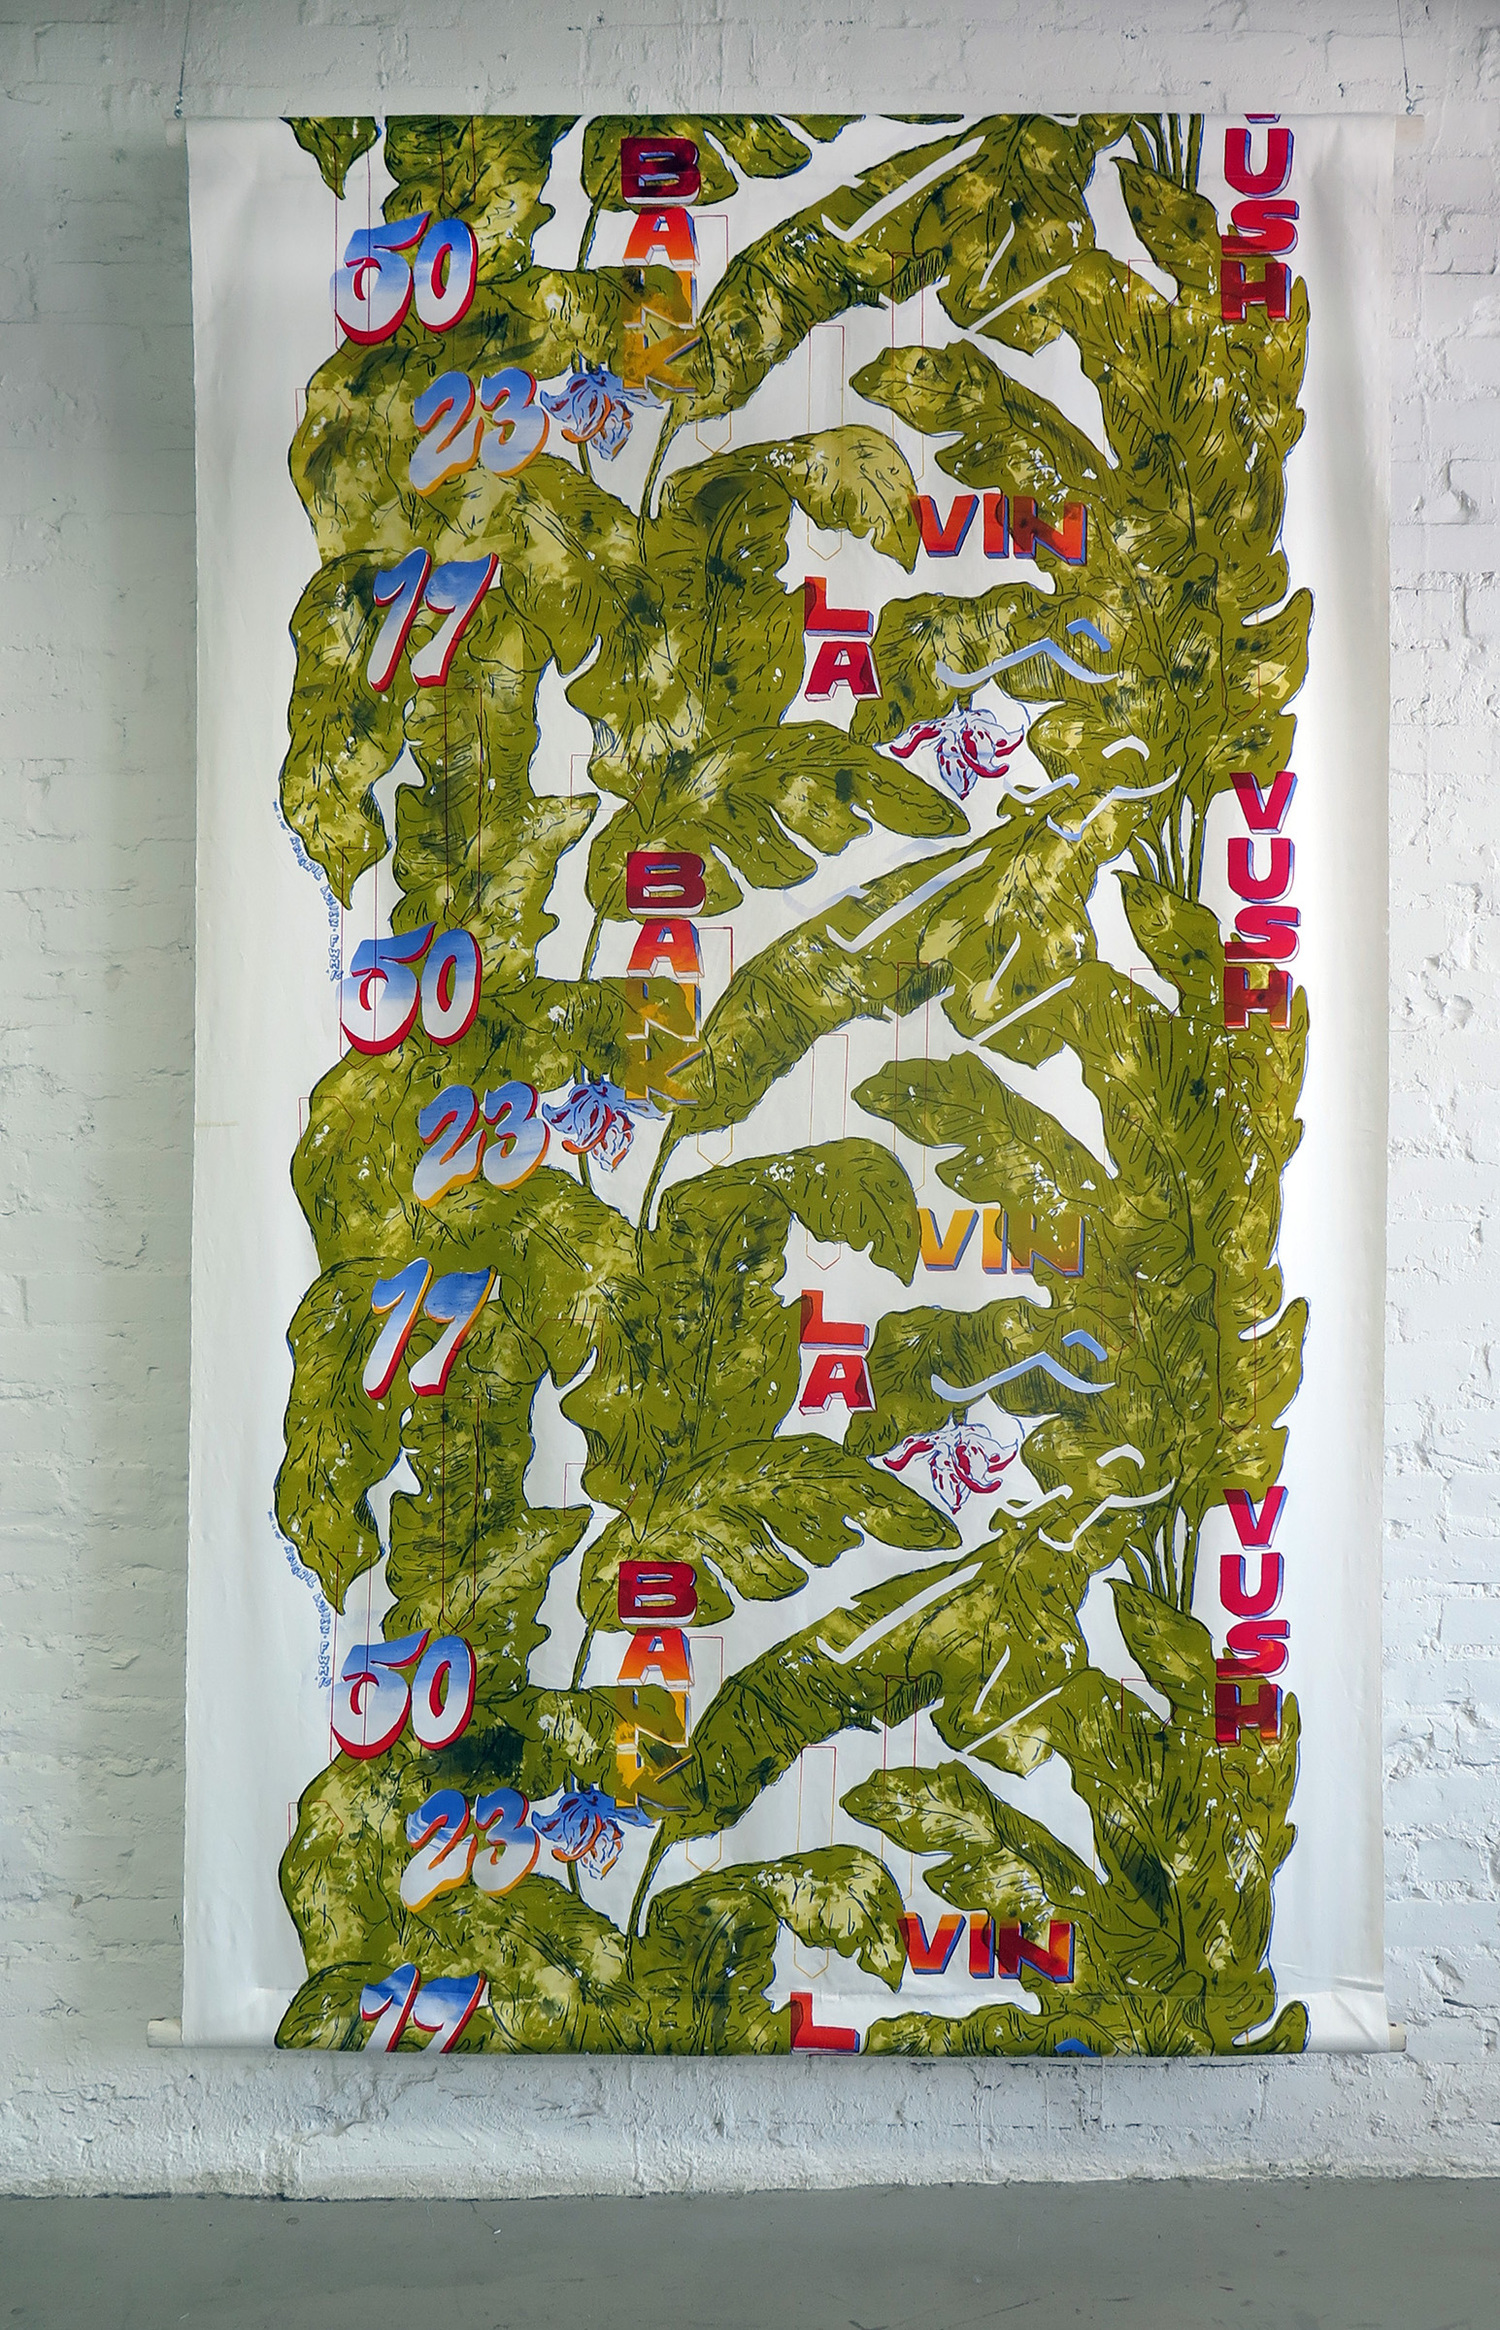 BANK LA VUSH, silkscreen pigment on cotton sateen, 40” x 36” repeat yardage. Printed at The Fabric Workshop and Museum, Philadelphia, PA, Summer 2015. Photos by Carlos Avendano and Ryan Parker